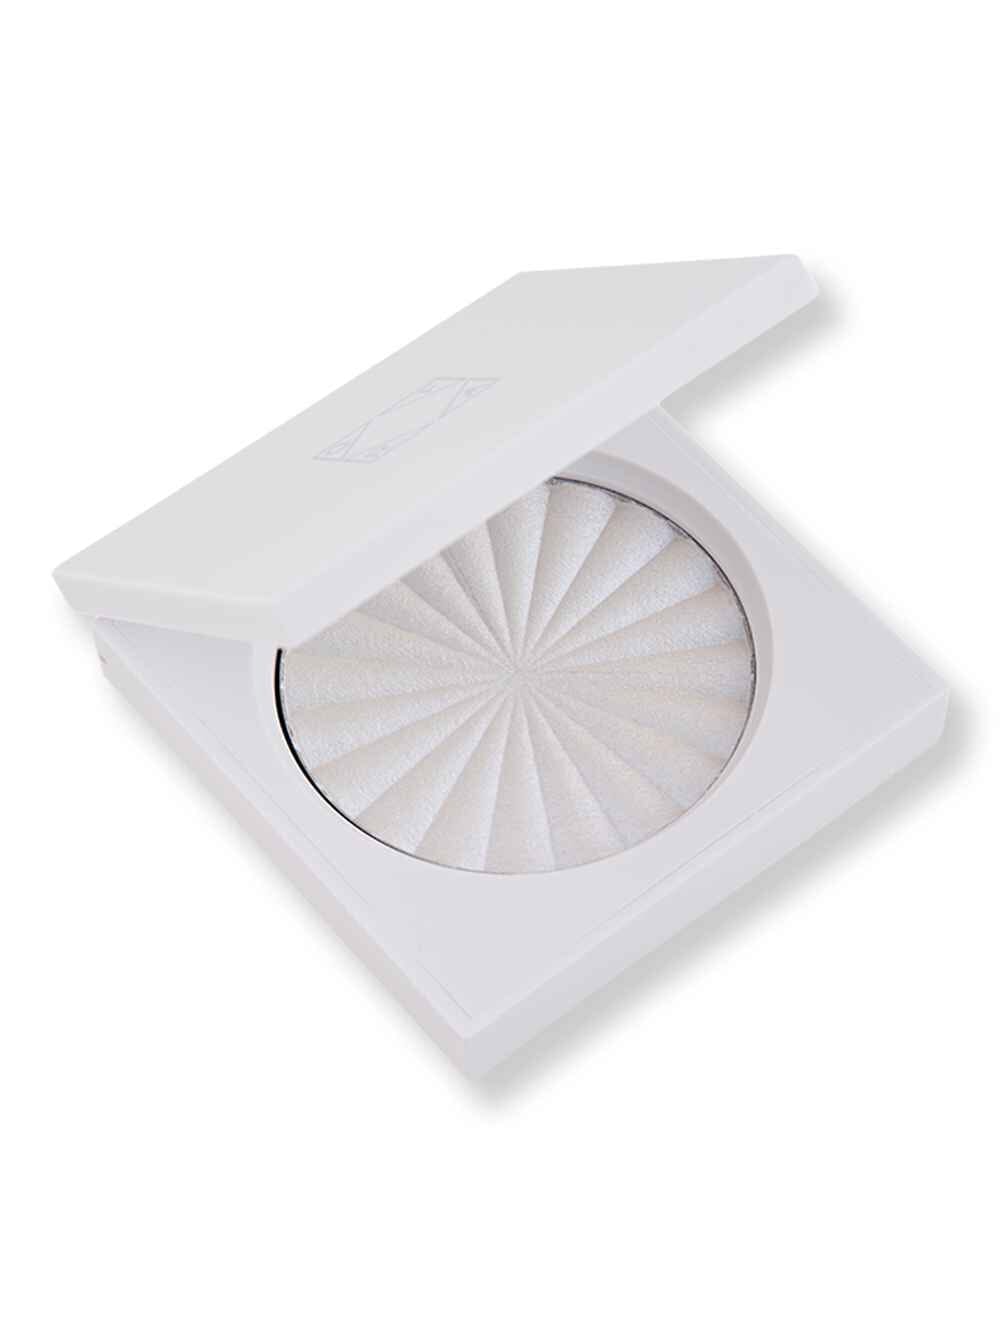 OFRA Cosmetics OFRA Cosmetics Highlighter 10 gSpace Baby Highlighters 